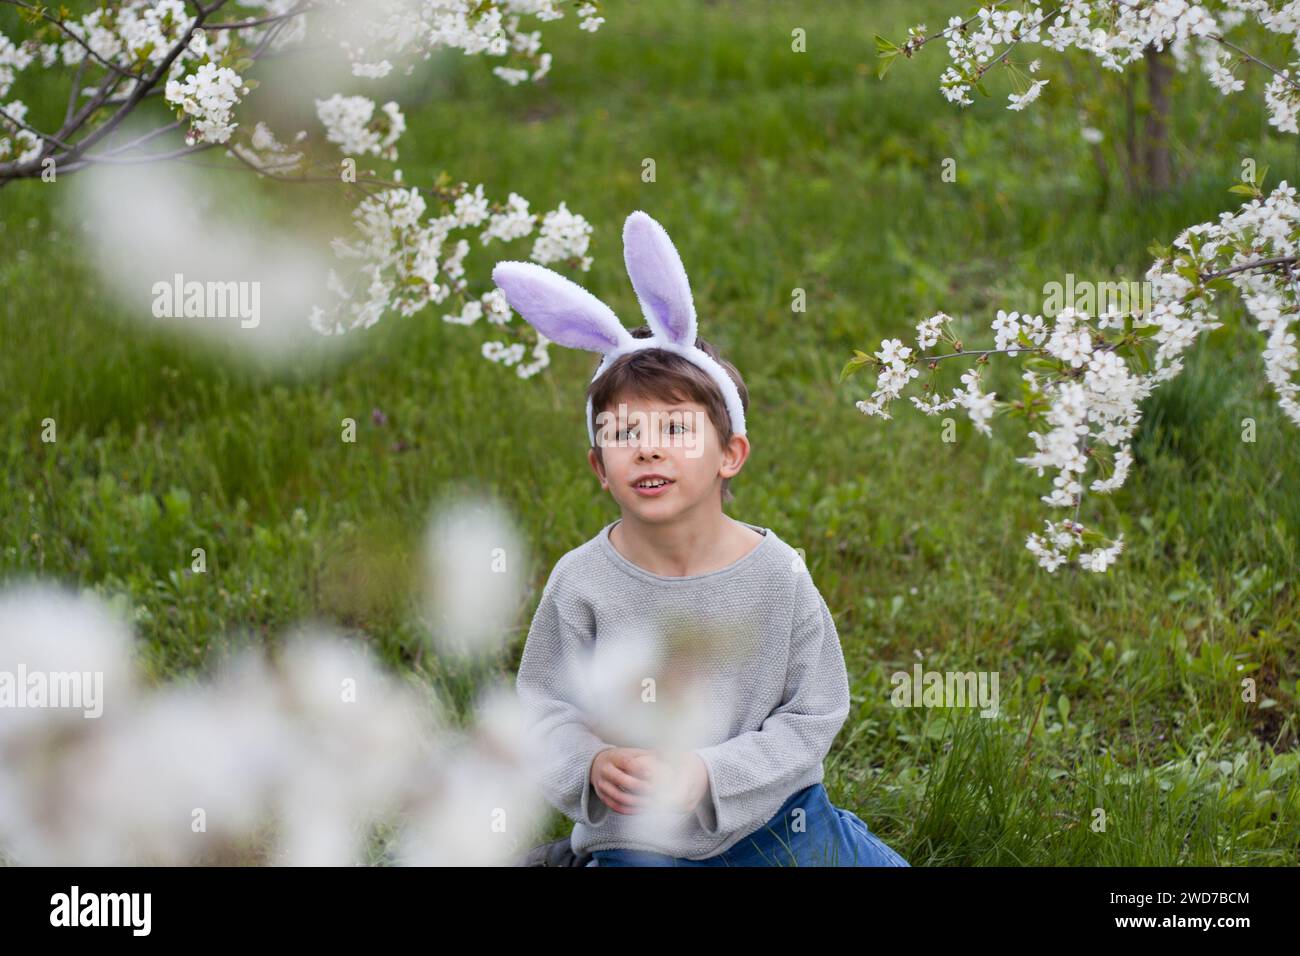 Cute preschool boy with bunny ears in garden. smiling child siting on green lawn against background of trees blooming with white flowers. Happy easter Stock Photo